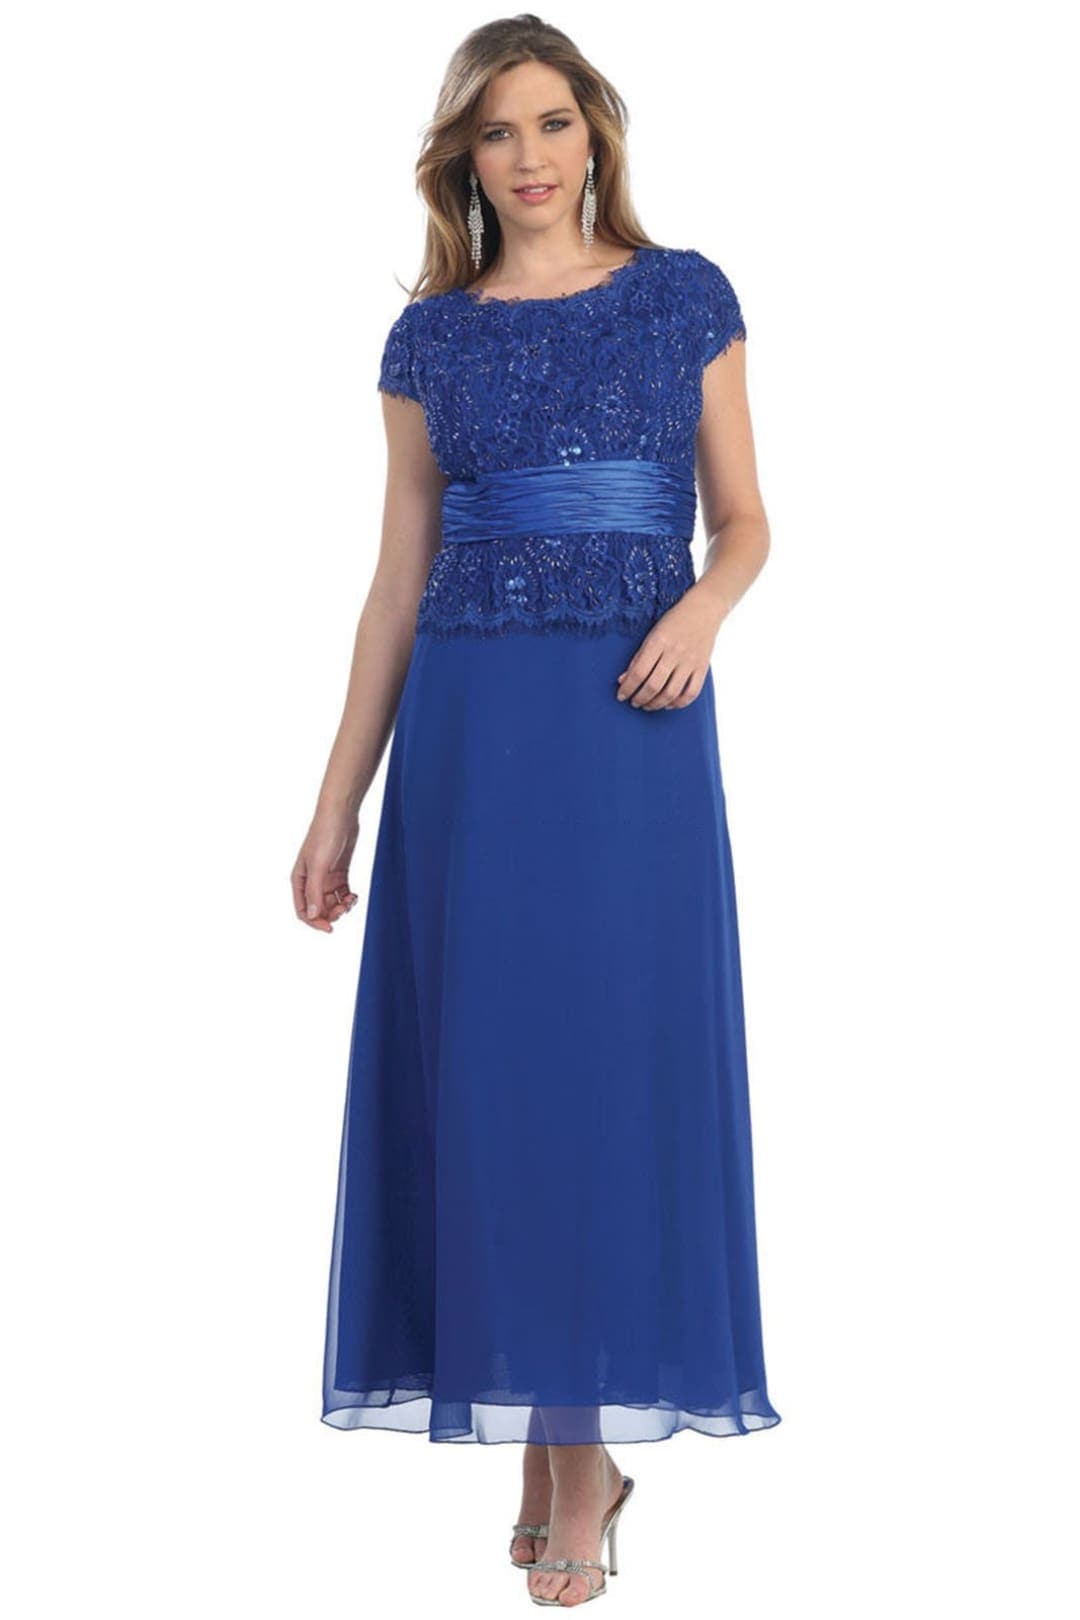 Classy Short Sleeve Mother OF the Bride Dress - Royal Blue / M